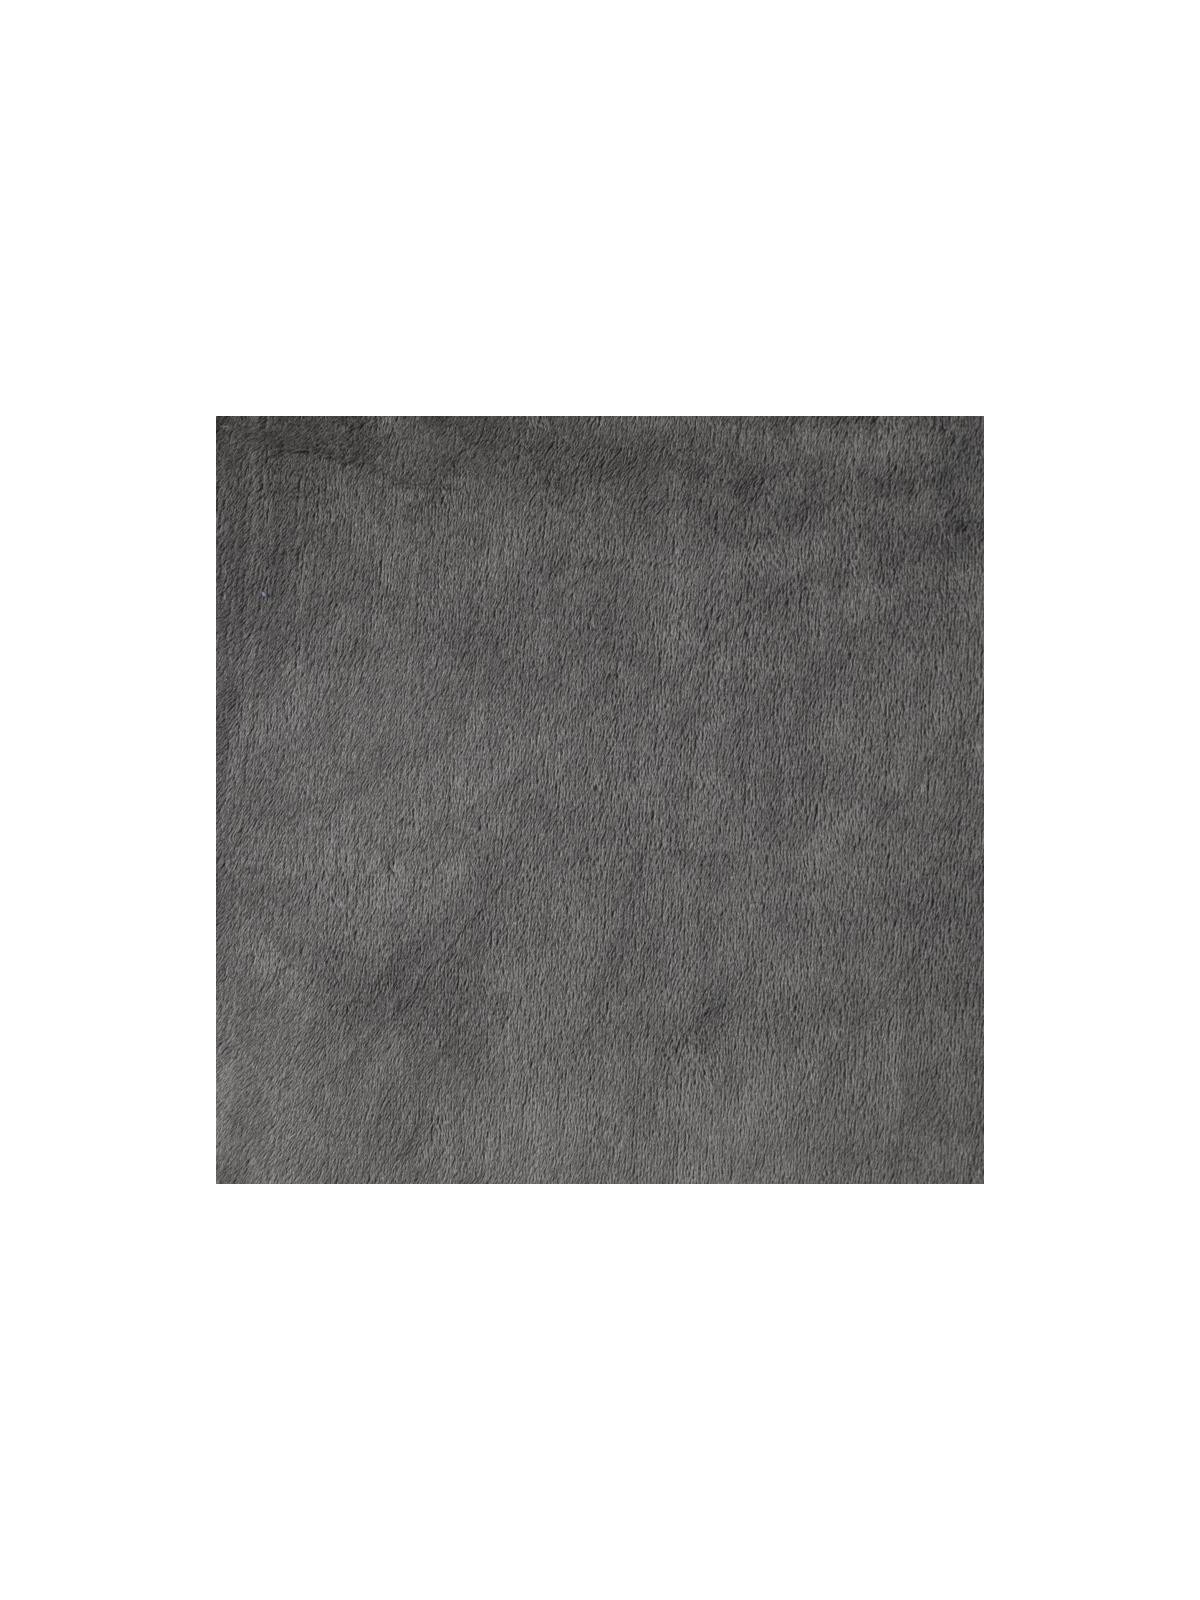 MINKY lisse gris anthracite